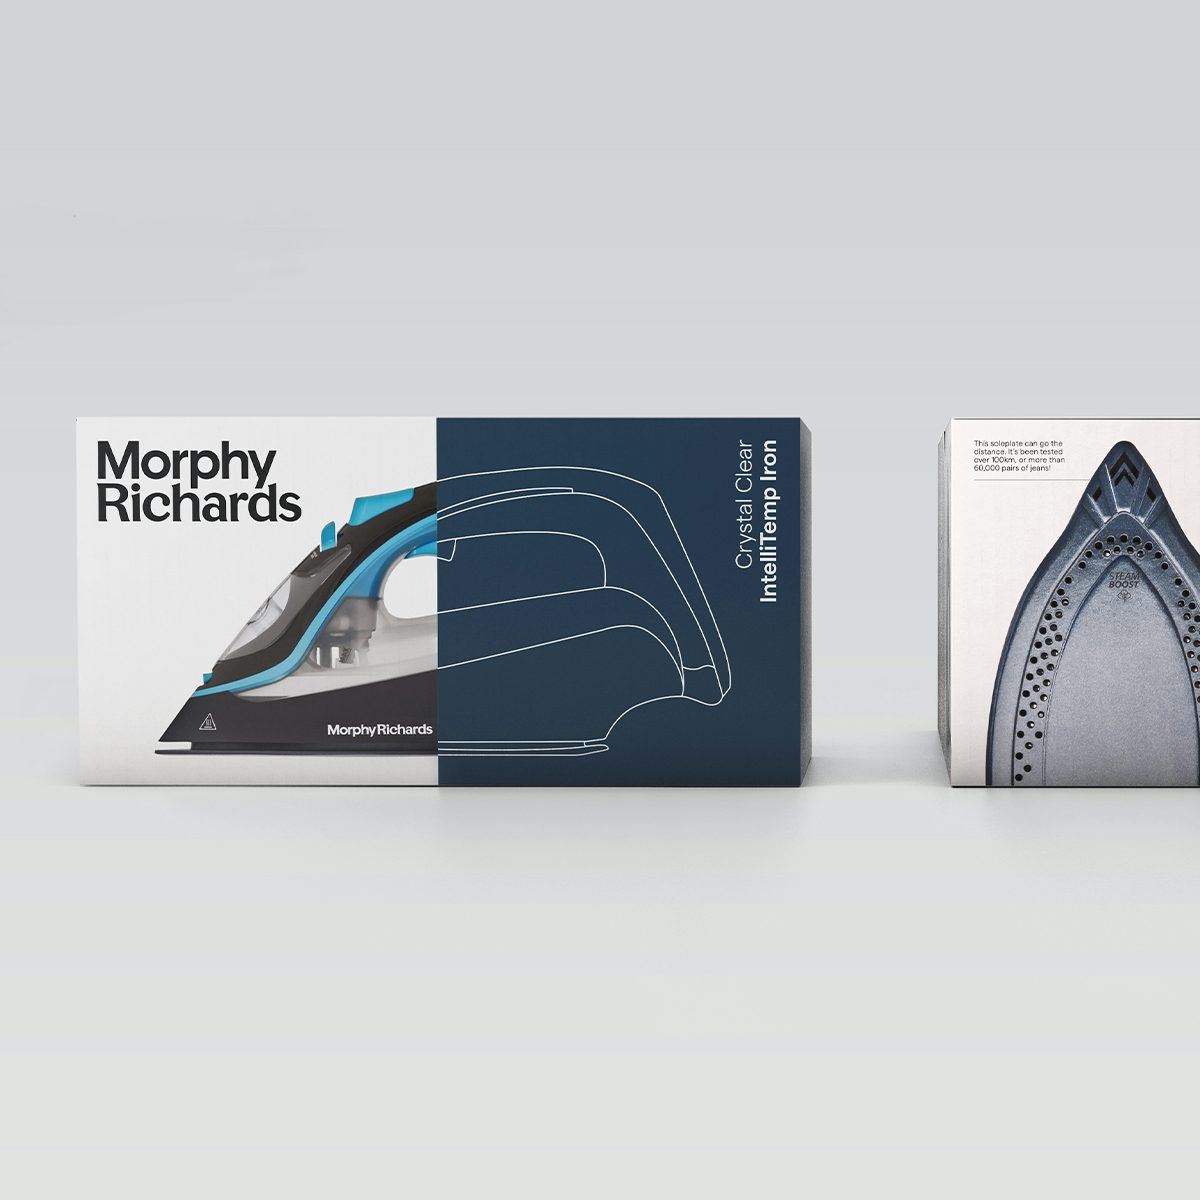 Photograph of Morphy Richards packaging for an iron designed by Otherway